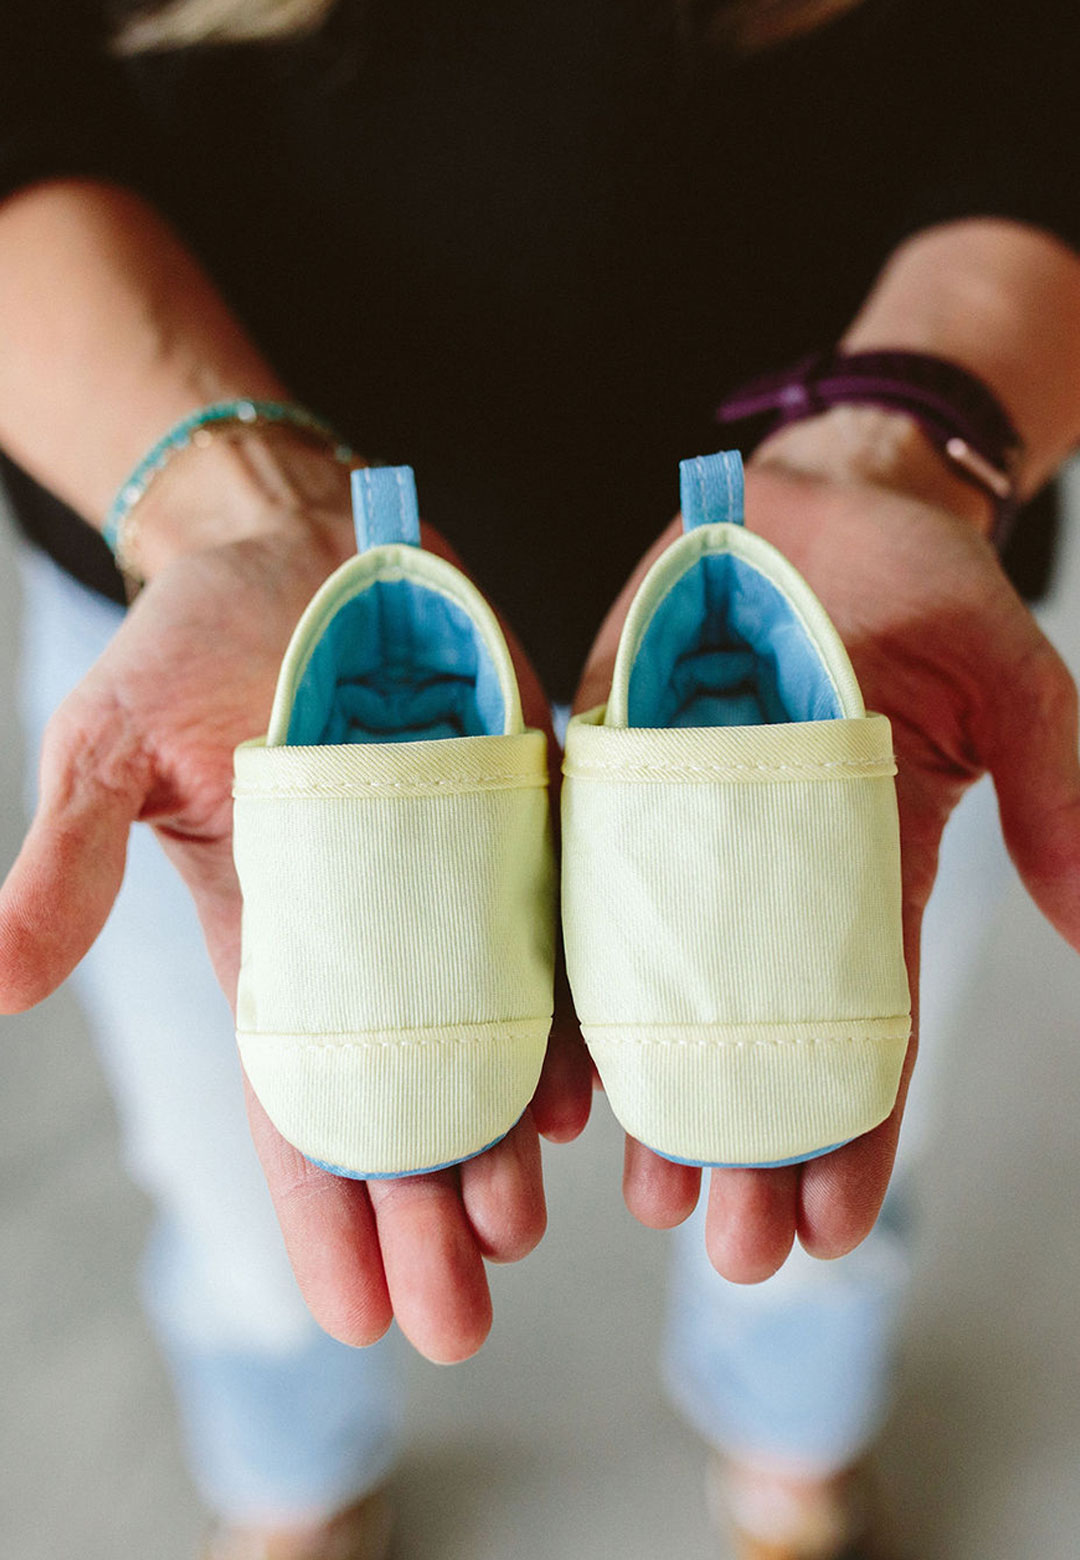 Woolybubs presents a pair of biodegradable baby shoes that dissolve in boiling water